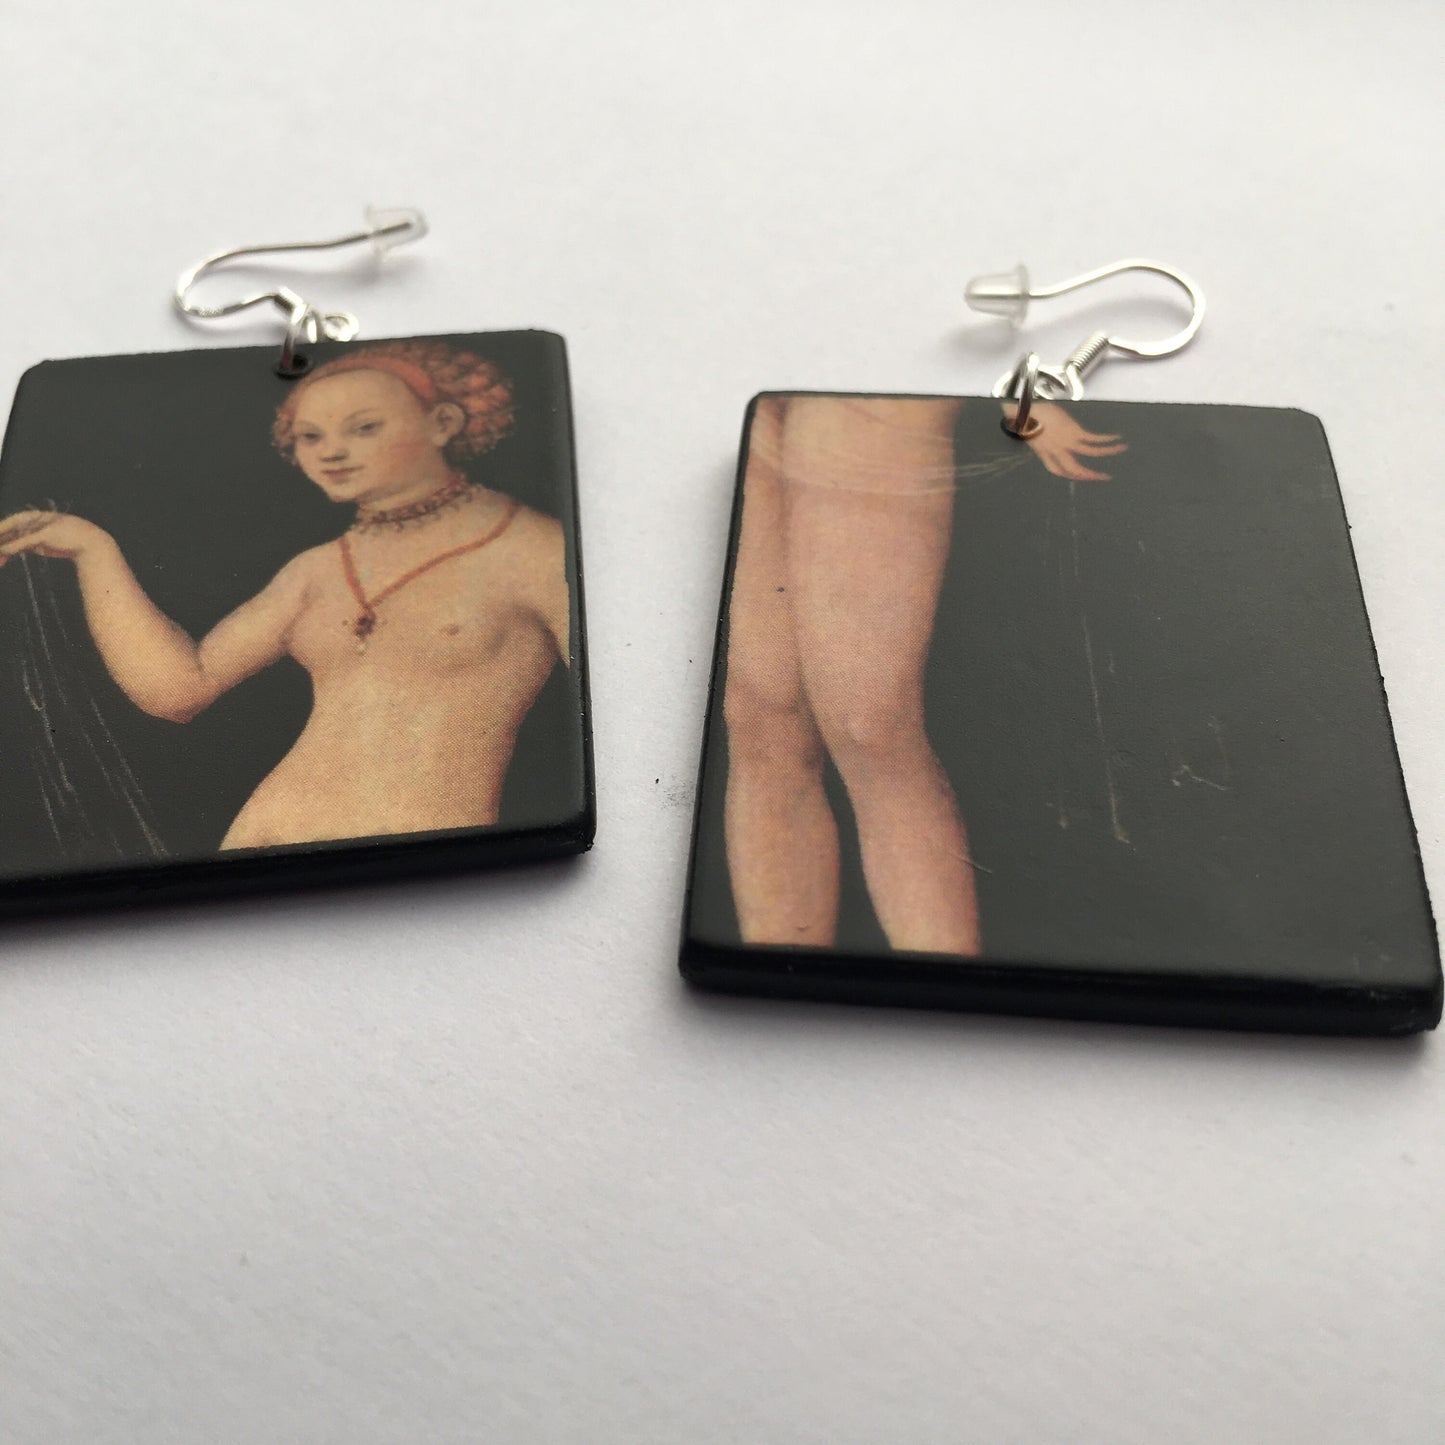 These sensual art earrings with Venus nude art detail by the German Renaissance famous artist Lucas Cranach the older are eccentric wooden mismatched earrings. 